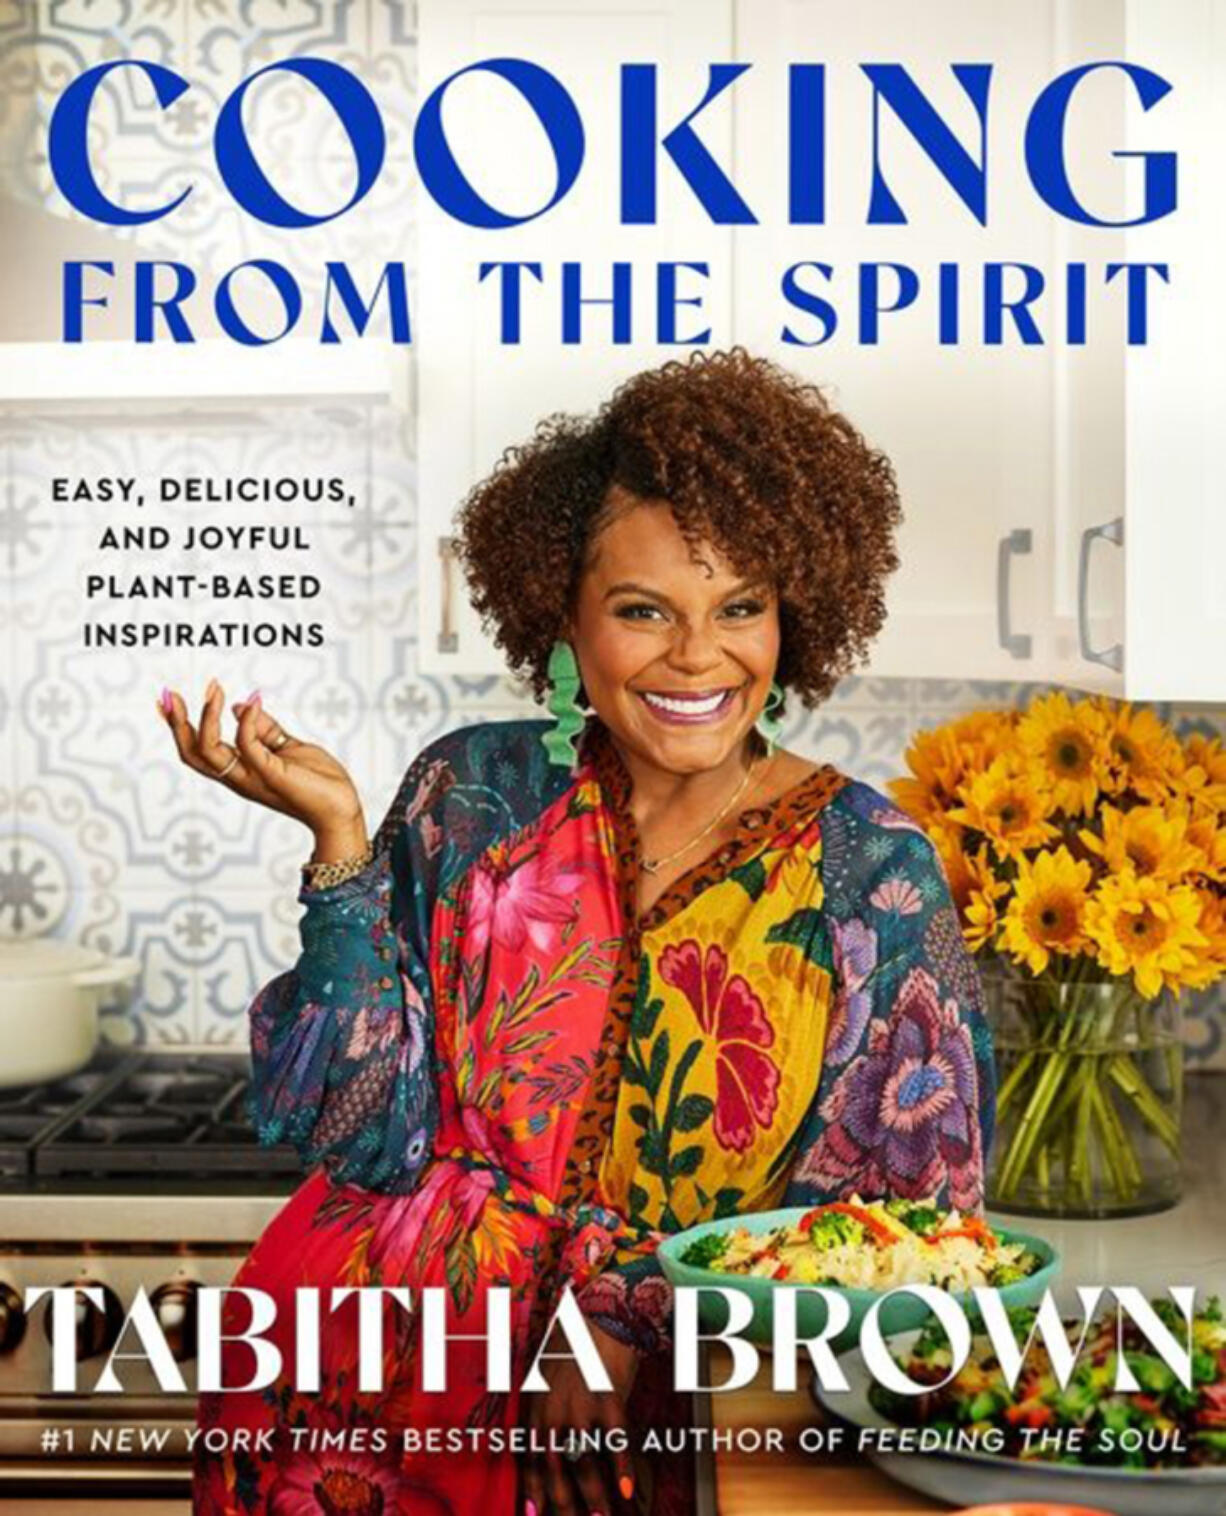 "Cooking from the Spirit," by Tabitha Brown.